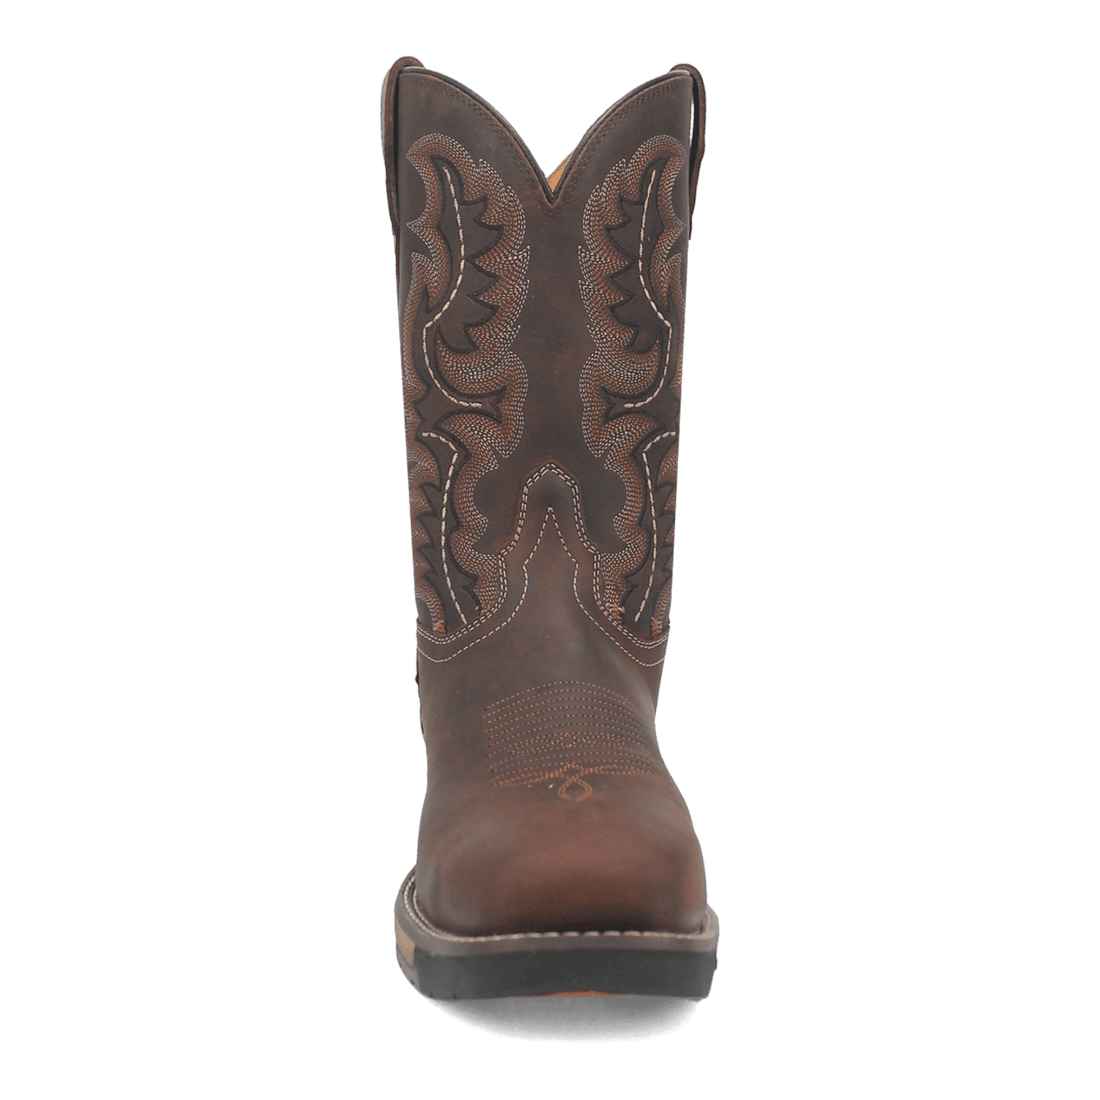 STRINGFELLOW STEEL TOE LEATHER BOOT Preview #16